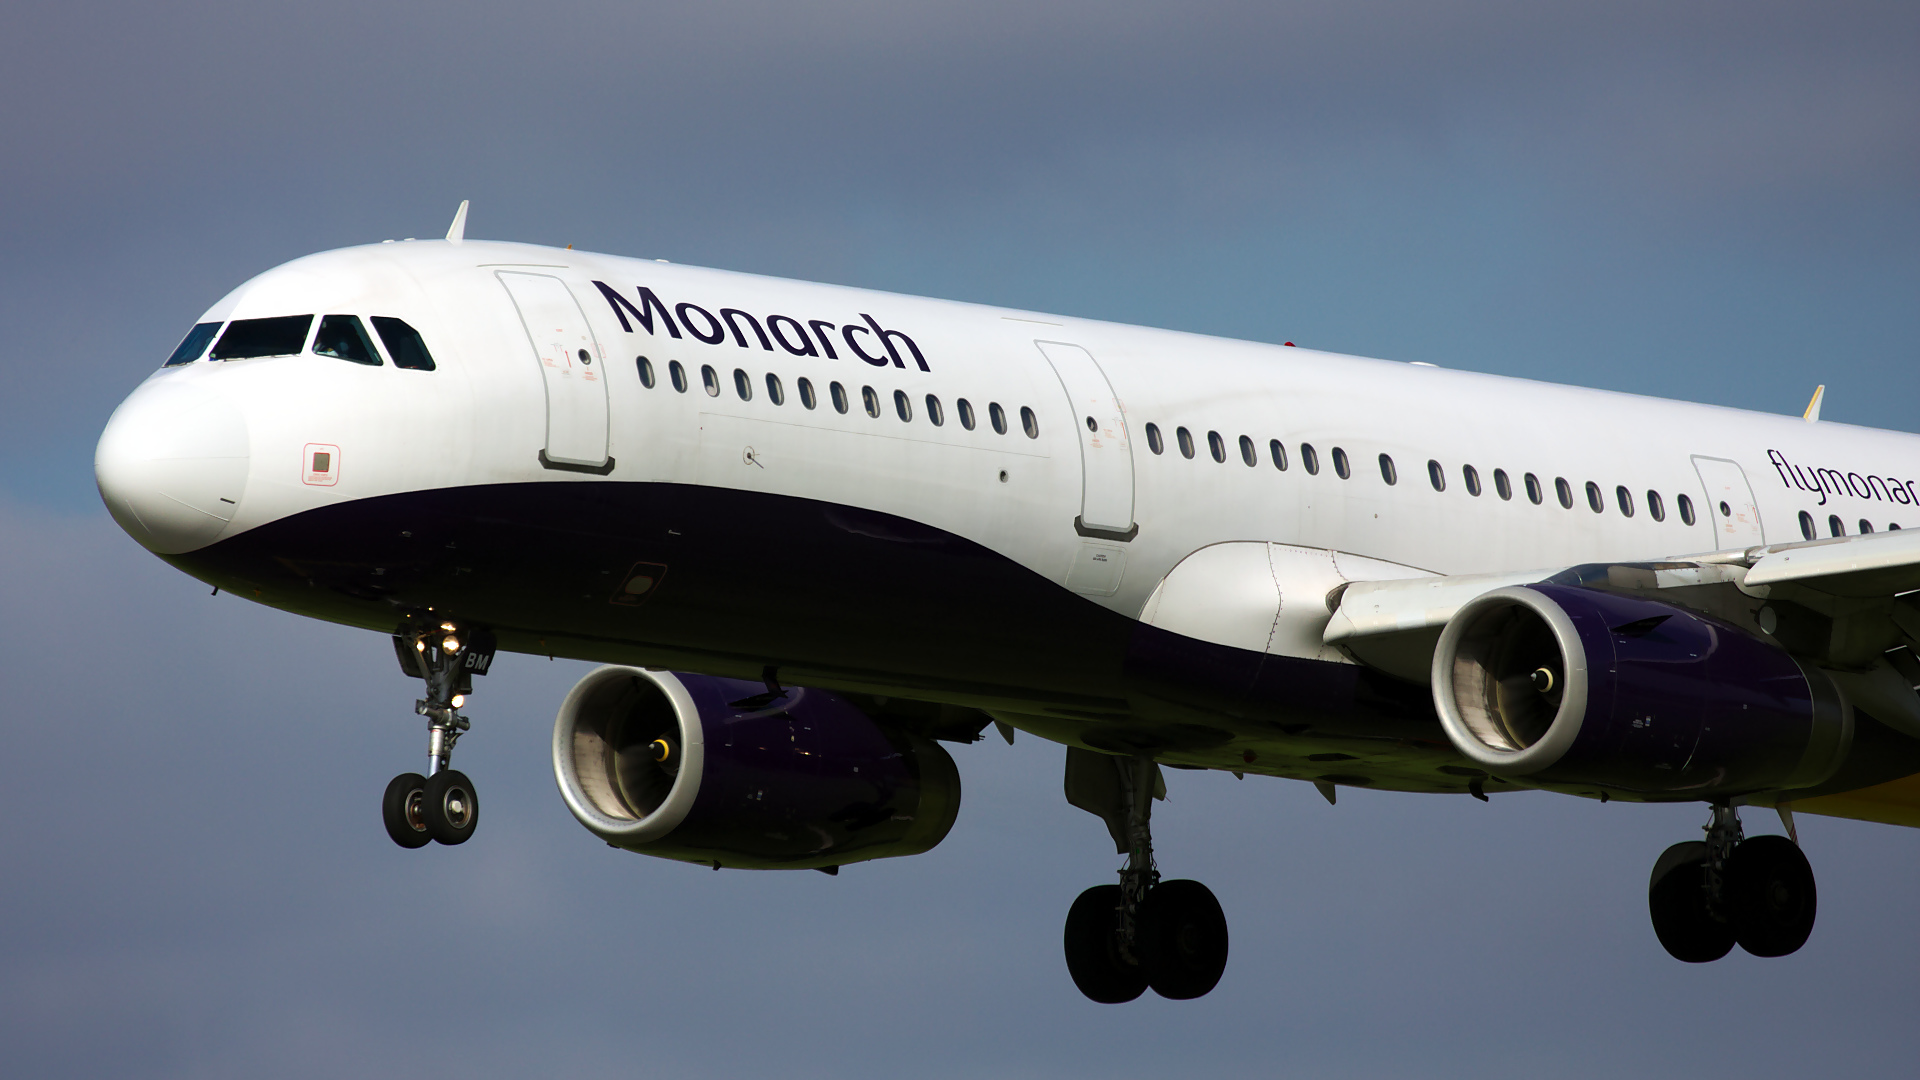 G-OZBM ✈ Monarch Airlines Airbus A321-231 @ Manchester